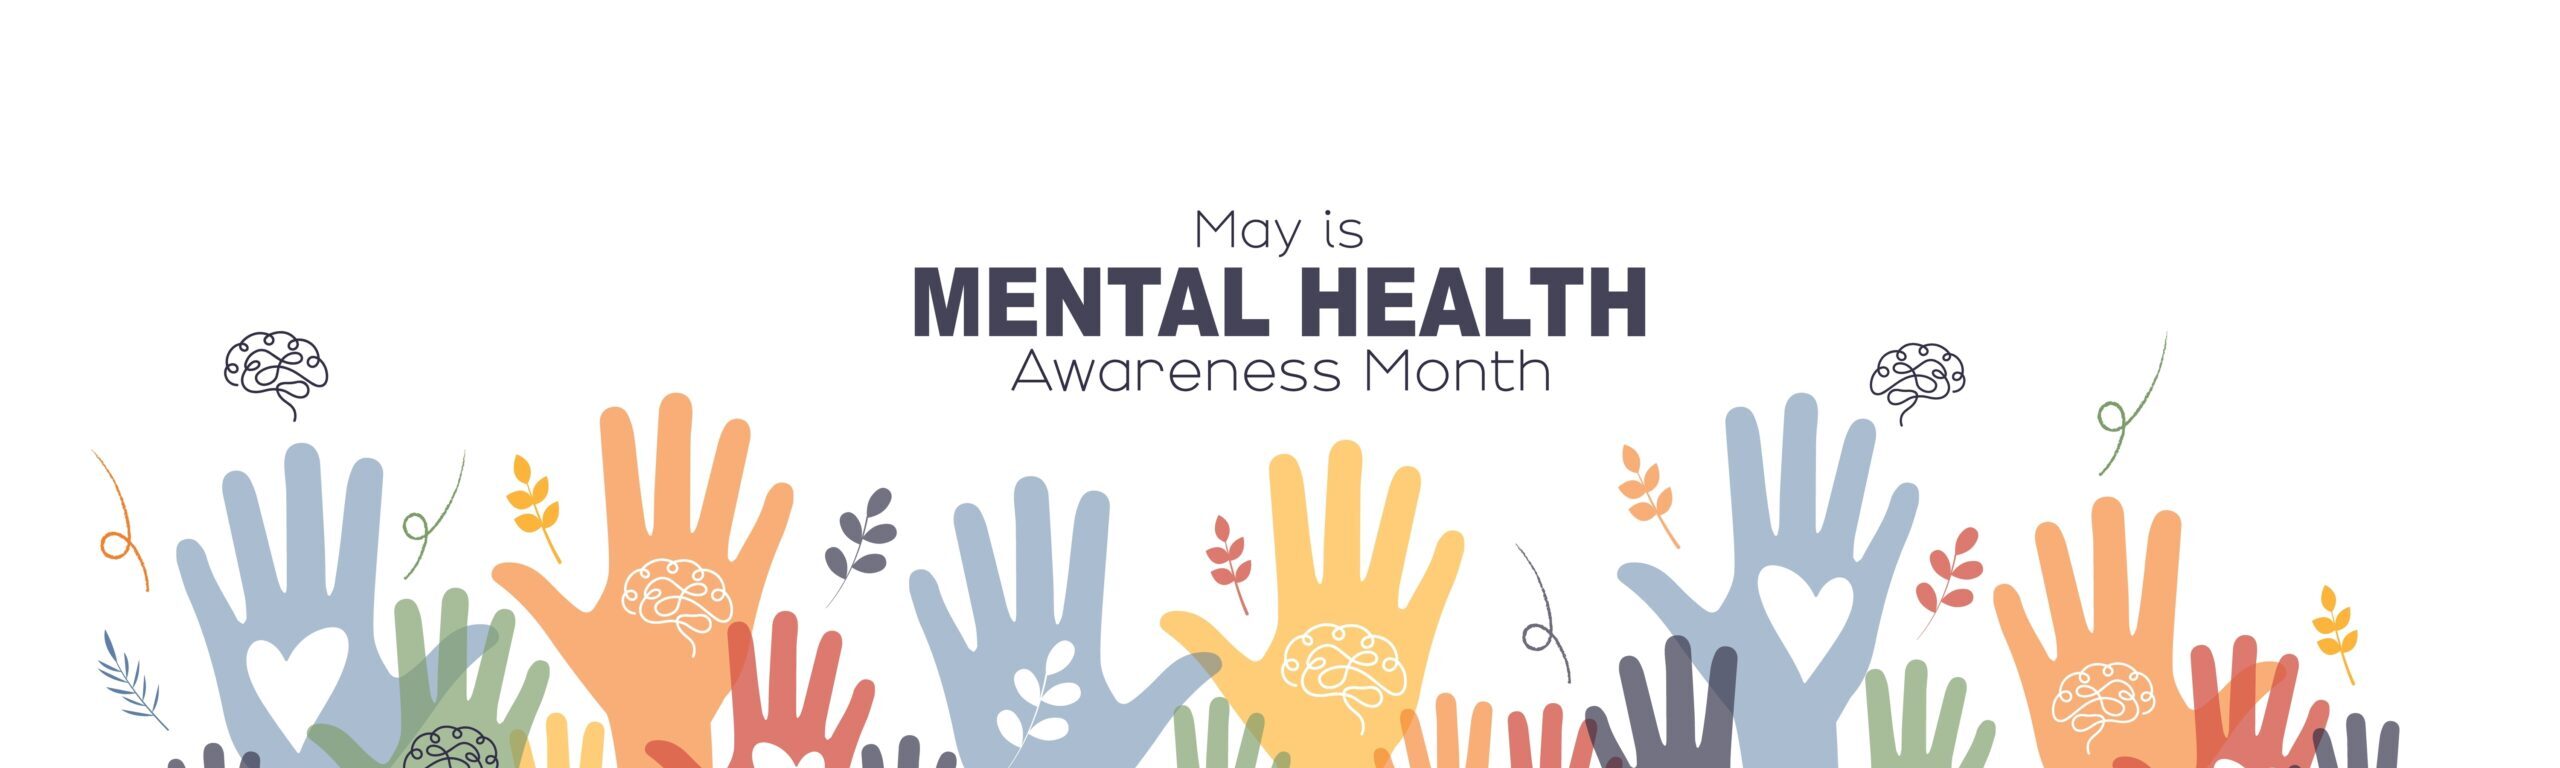 Mental Health Awareness Month: Early detection, stigma deflation, resource identification, and beyond